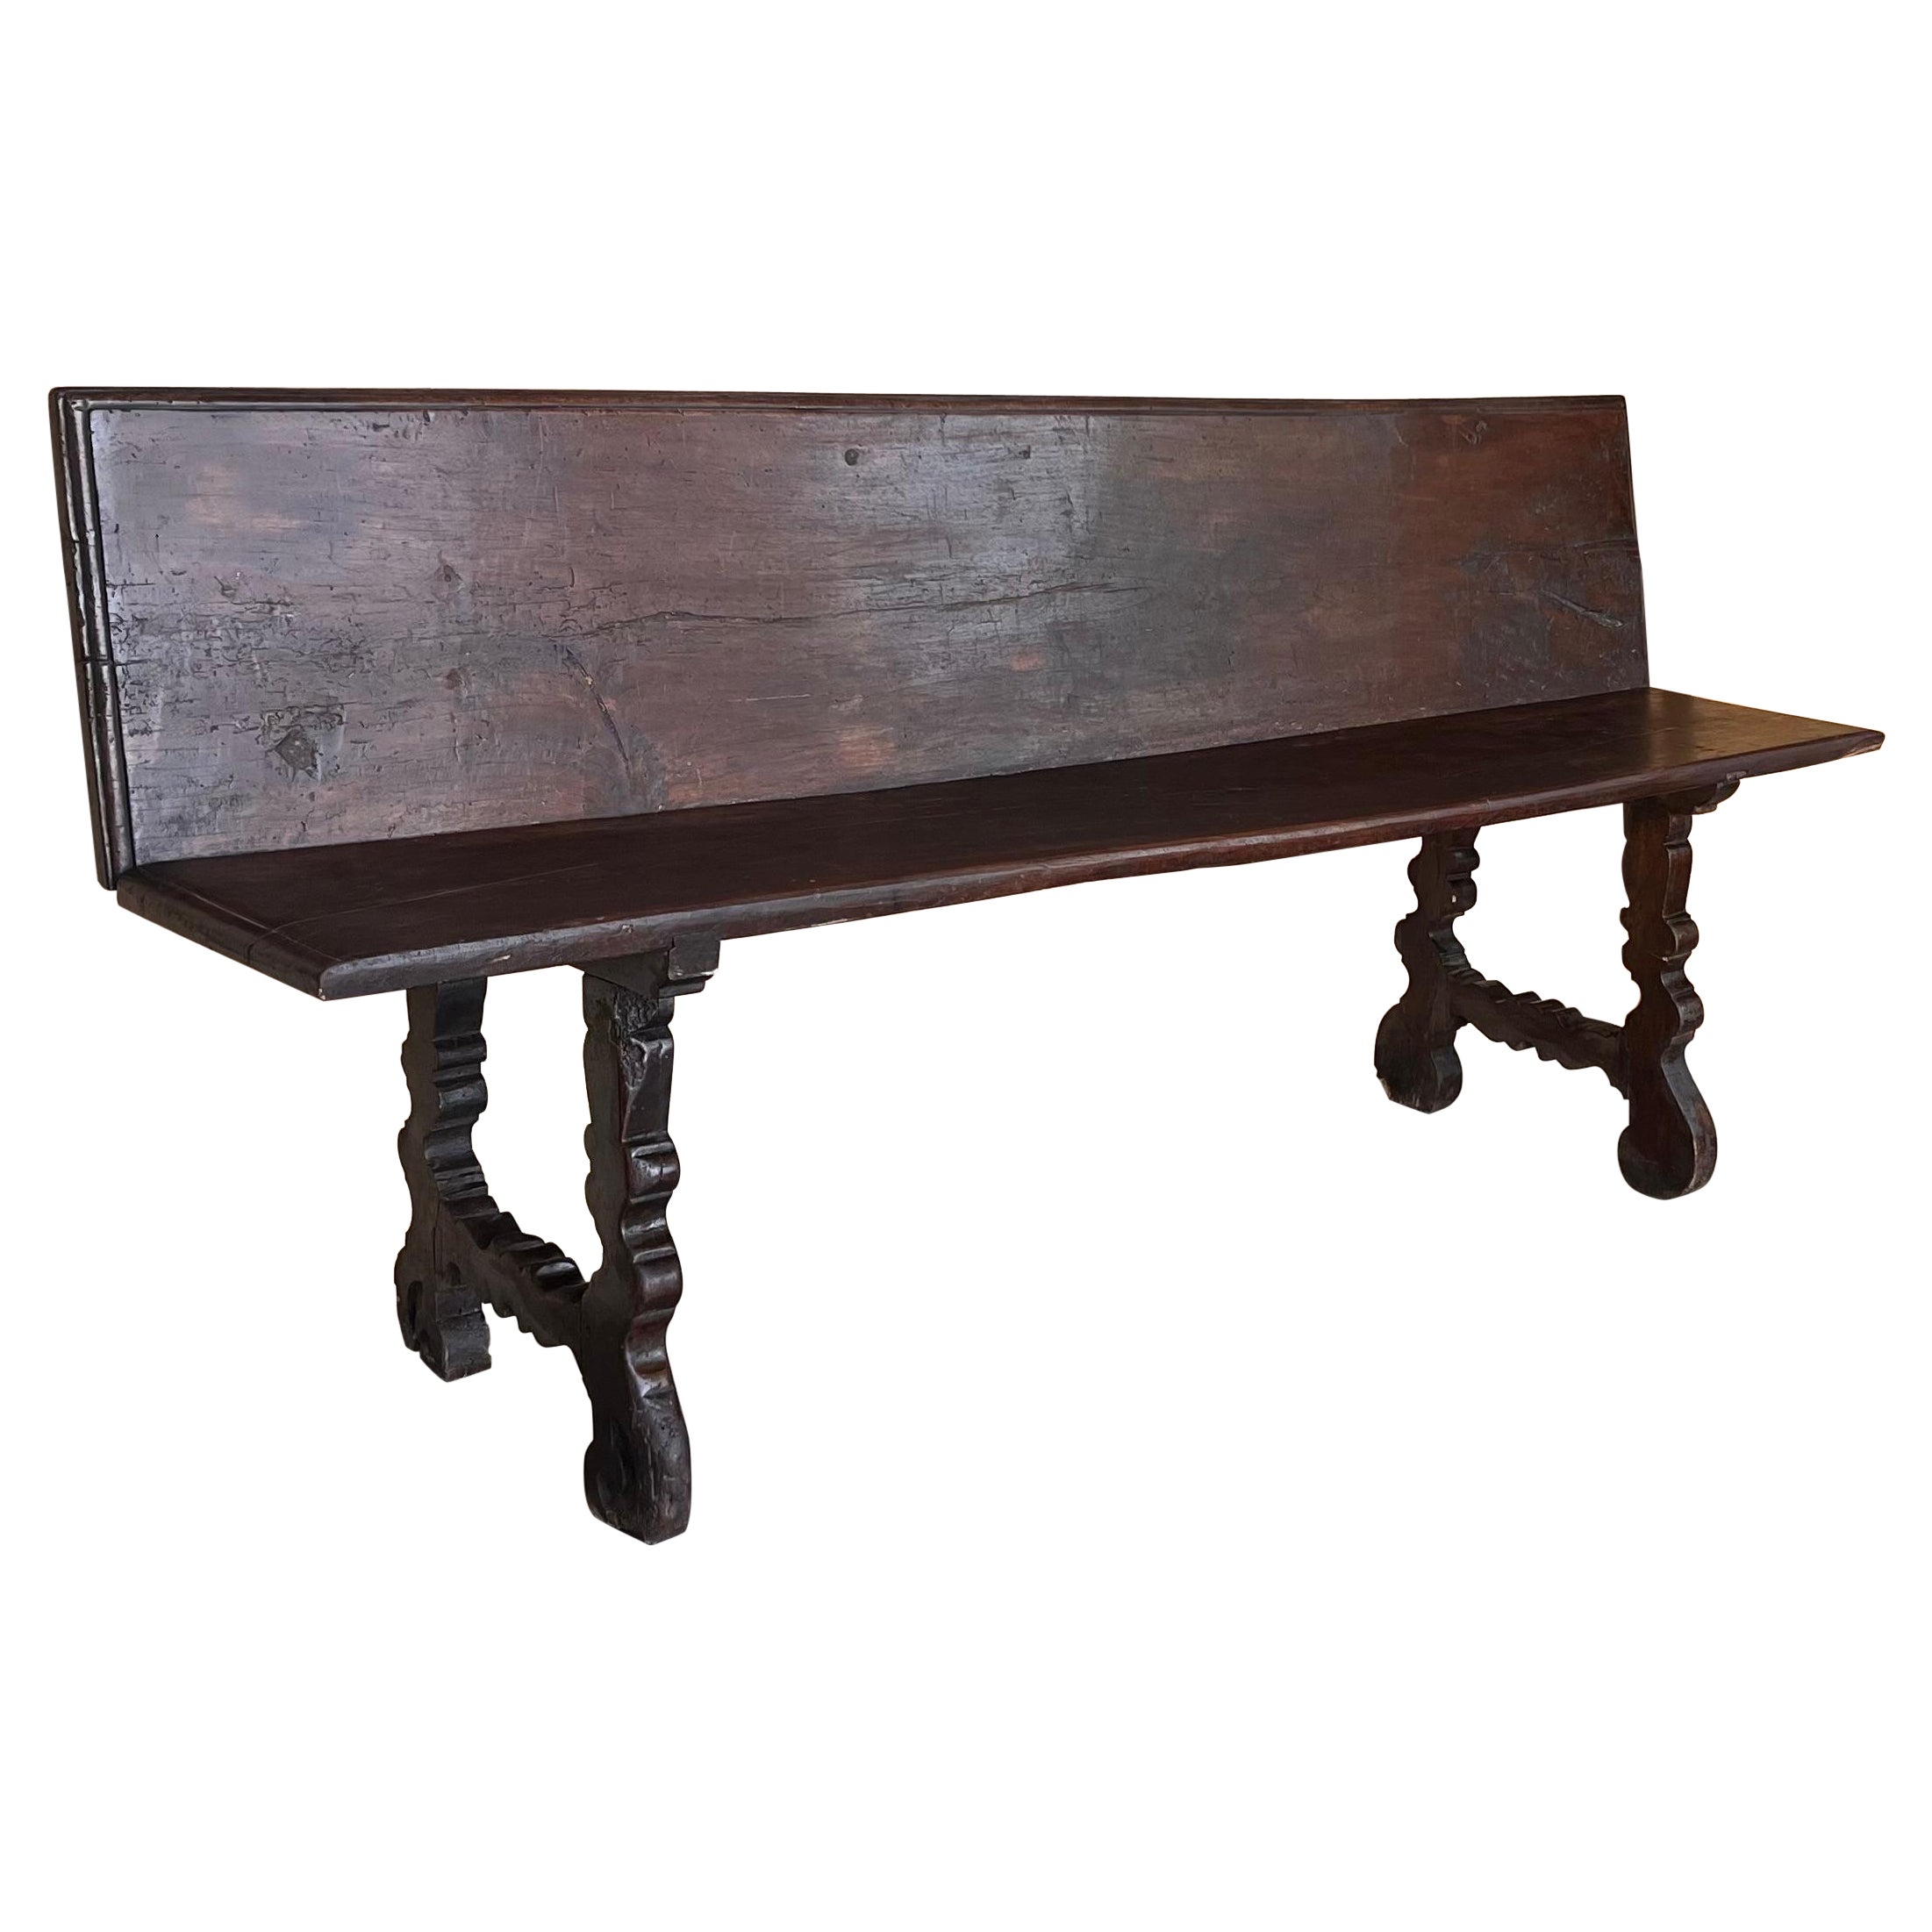 20th Century Spanish Renaissance Carved Walnut Bench Banquette "Escaño" For Sale